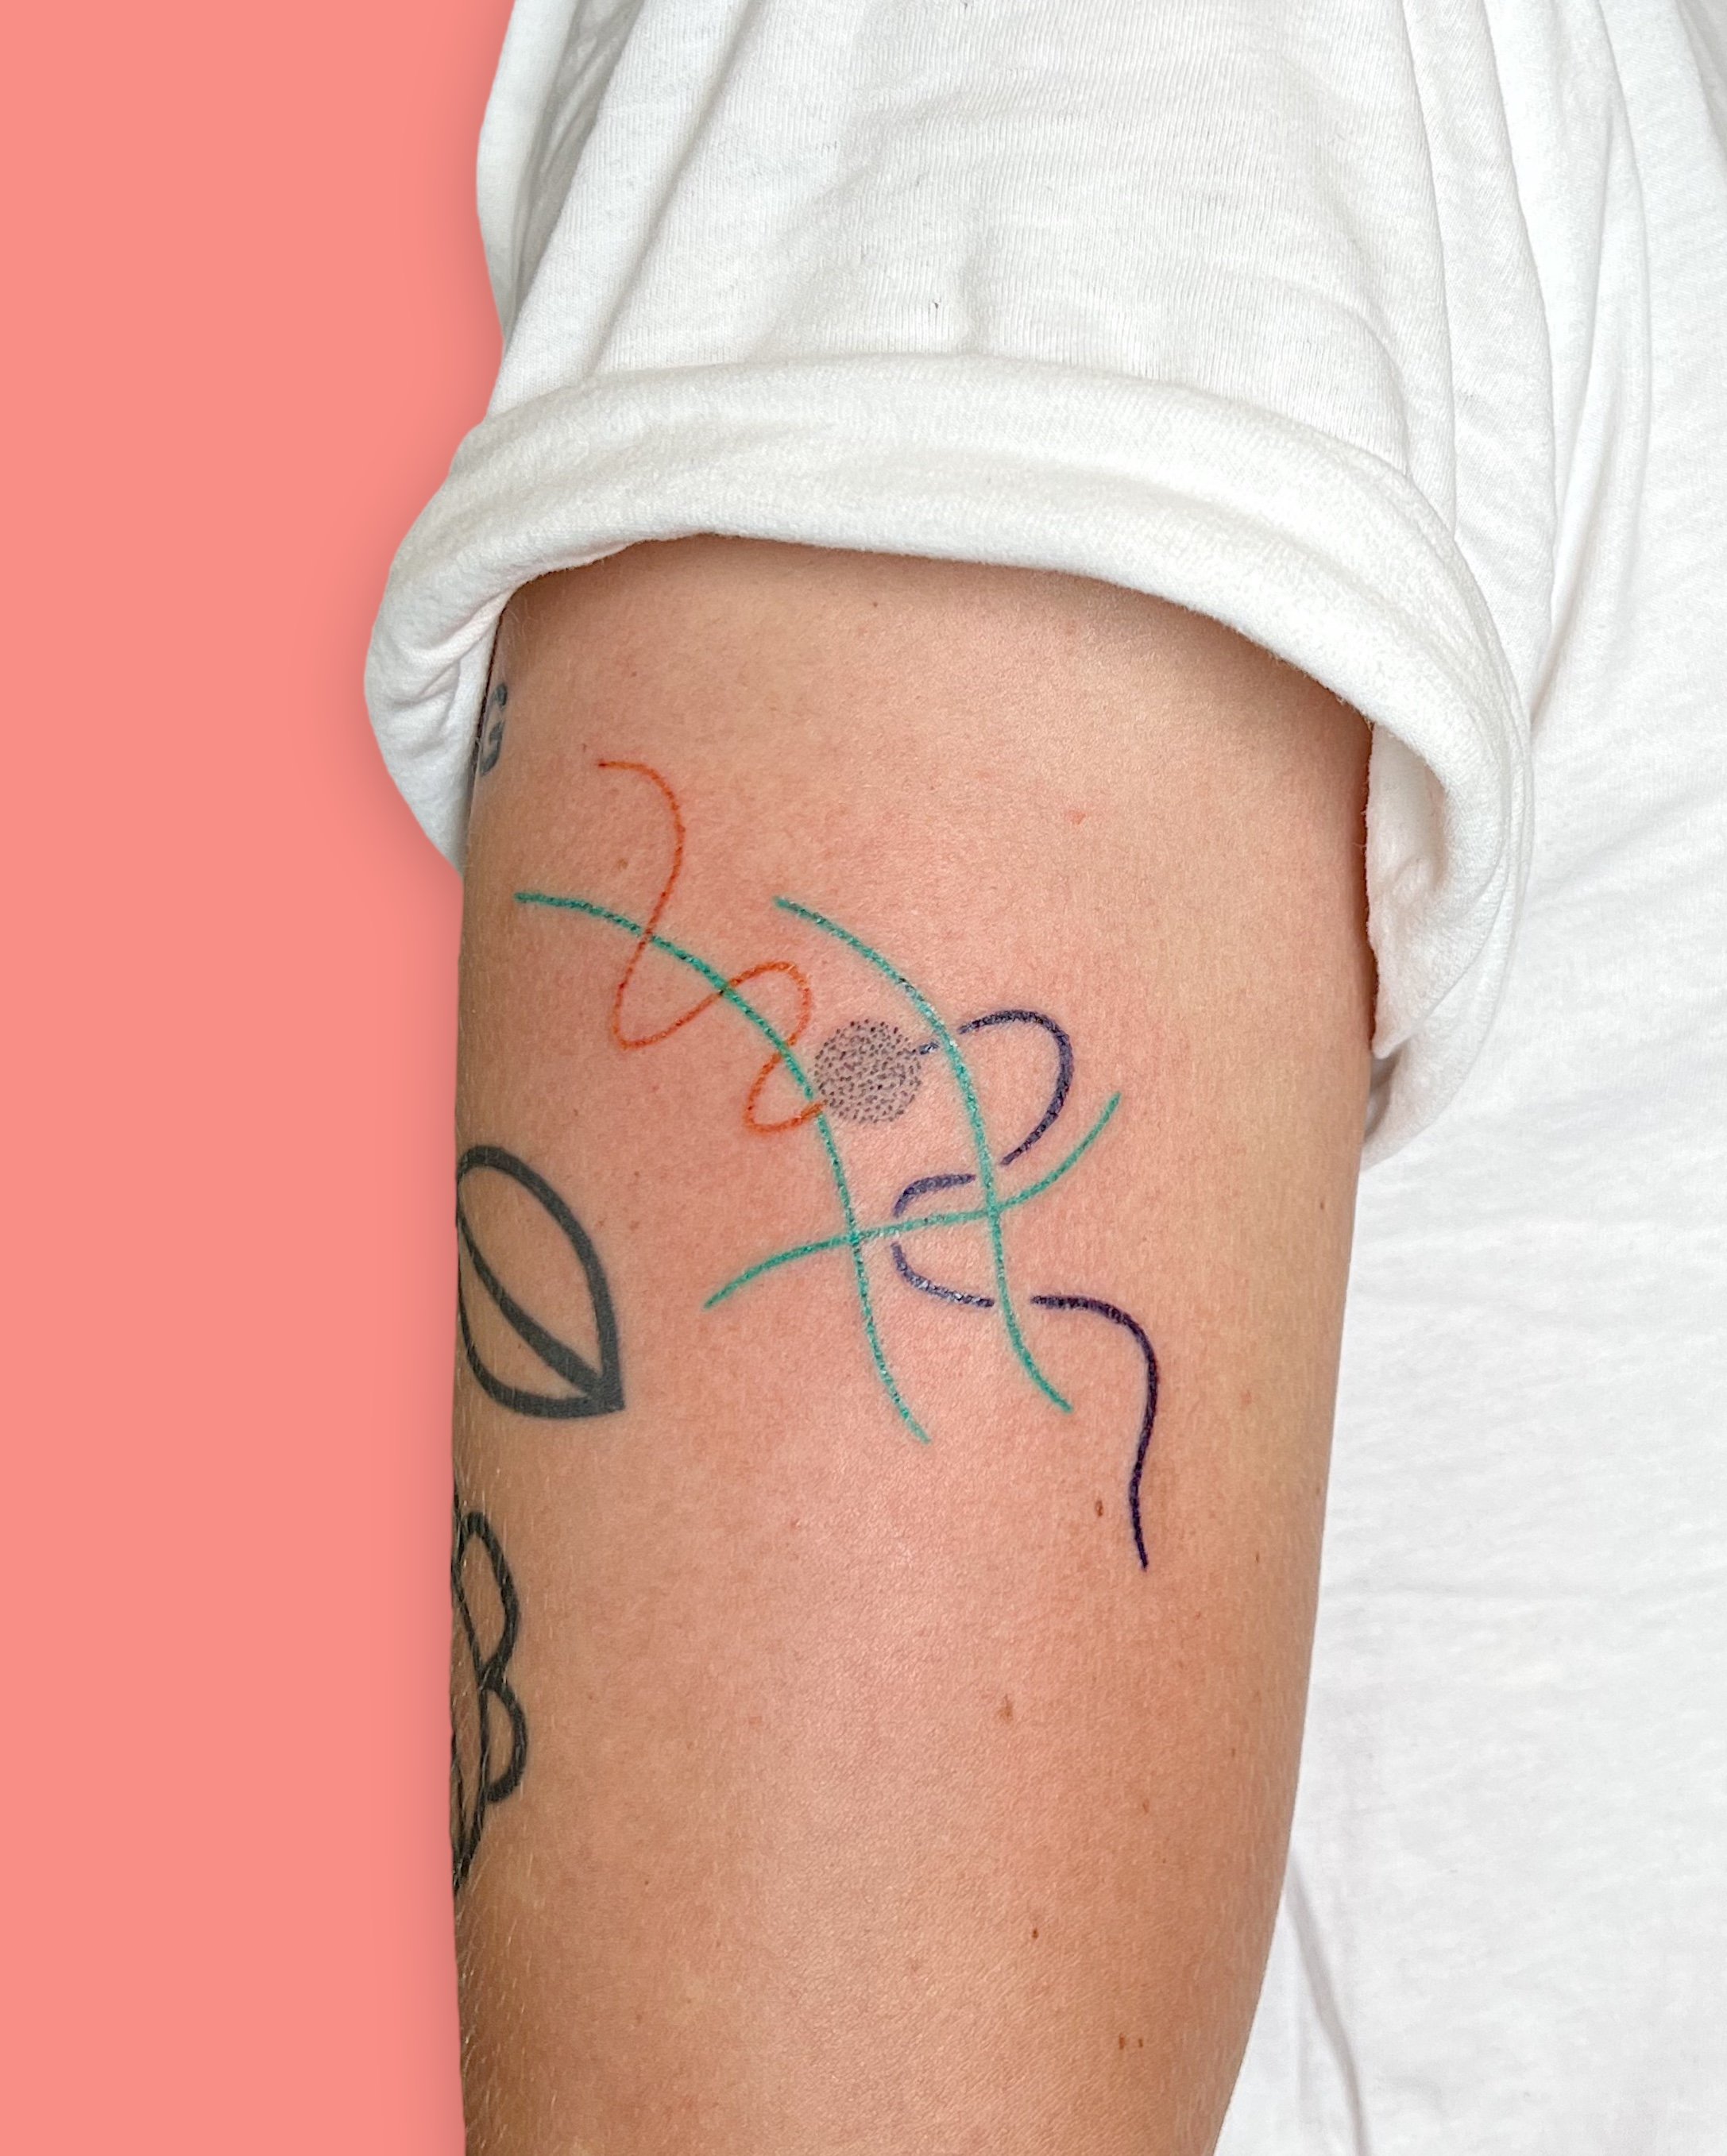 Abstract curvy lines tattooed on the arm by Madame Unikat.JPG